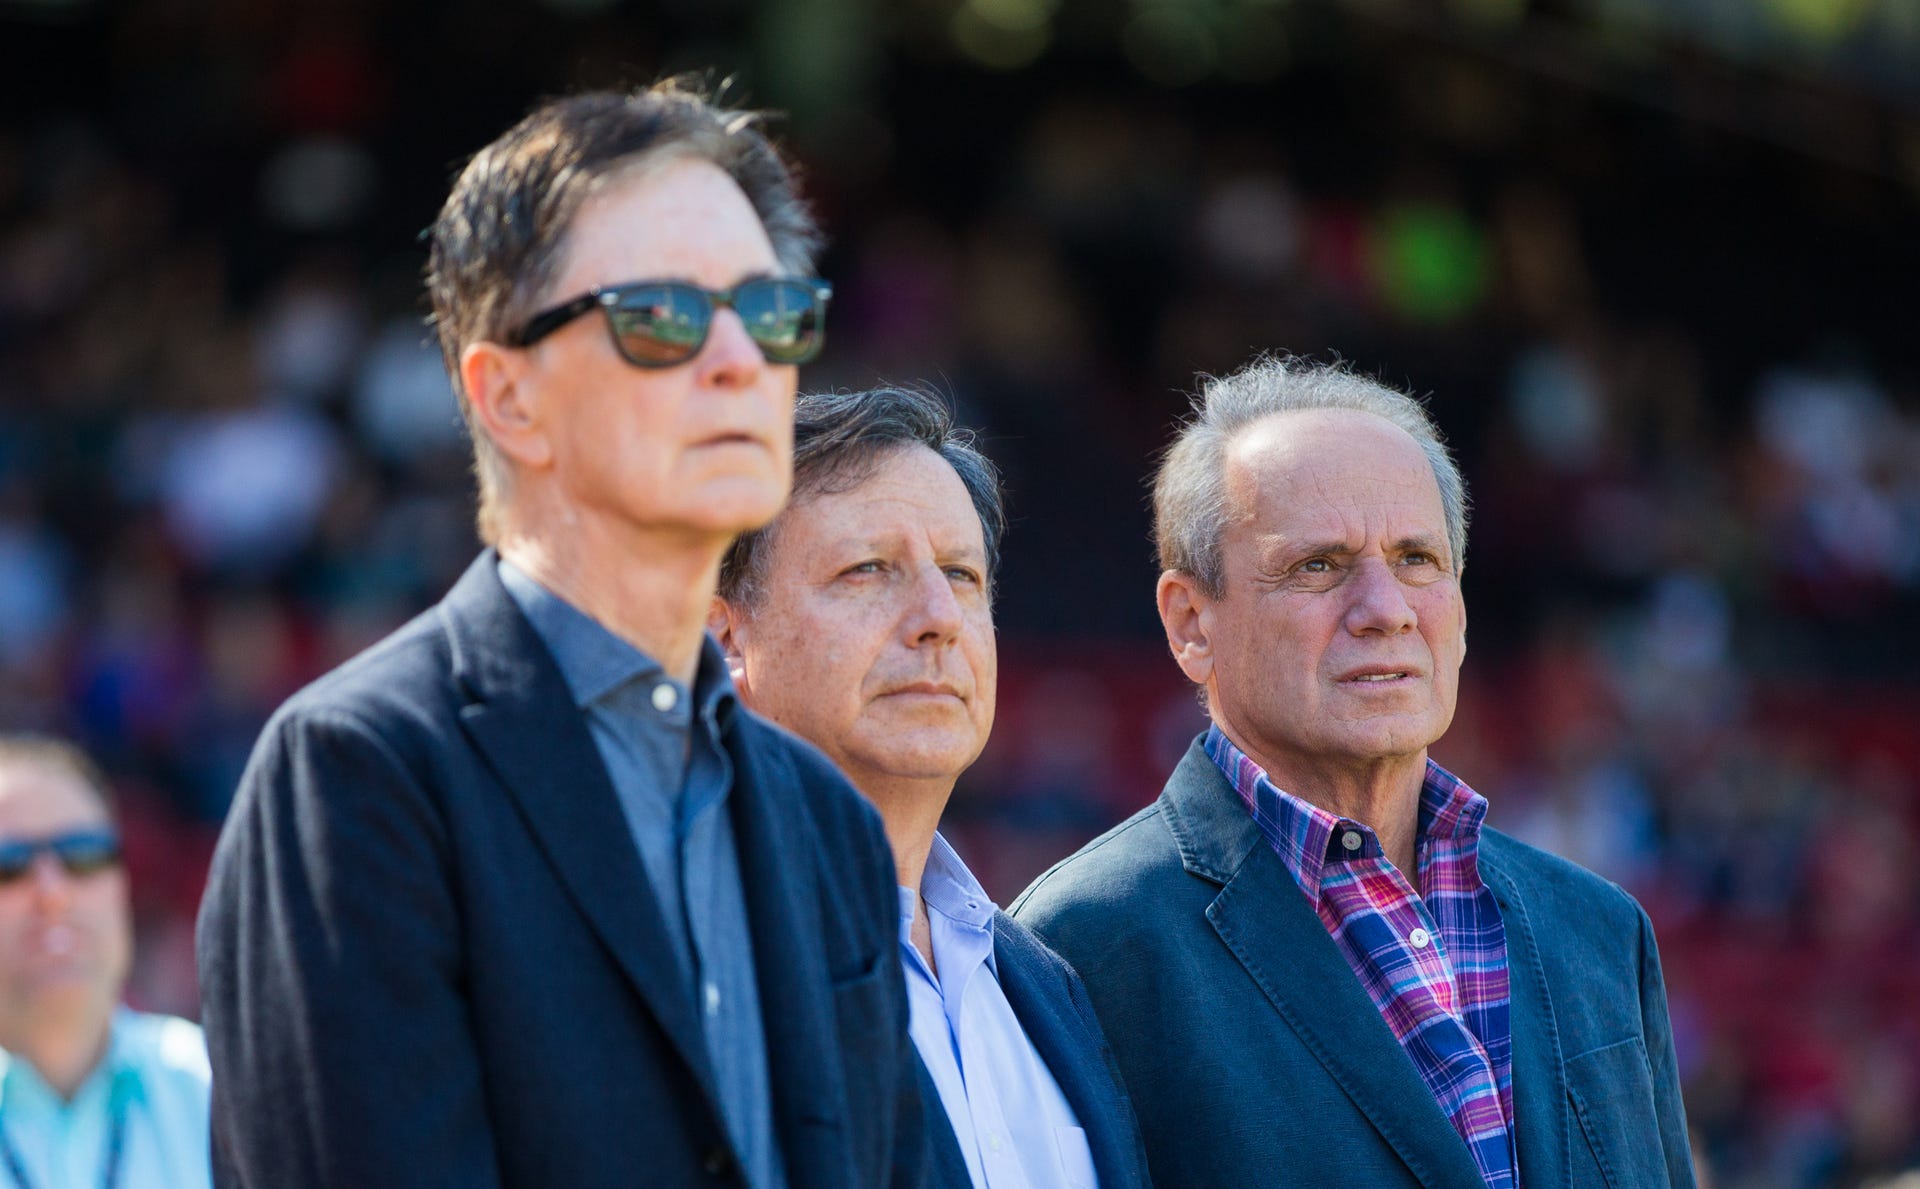 Sam Kennedy addresses John Henry, Tom Werner absences from Larry Lucchino’s funeral [Video]